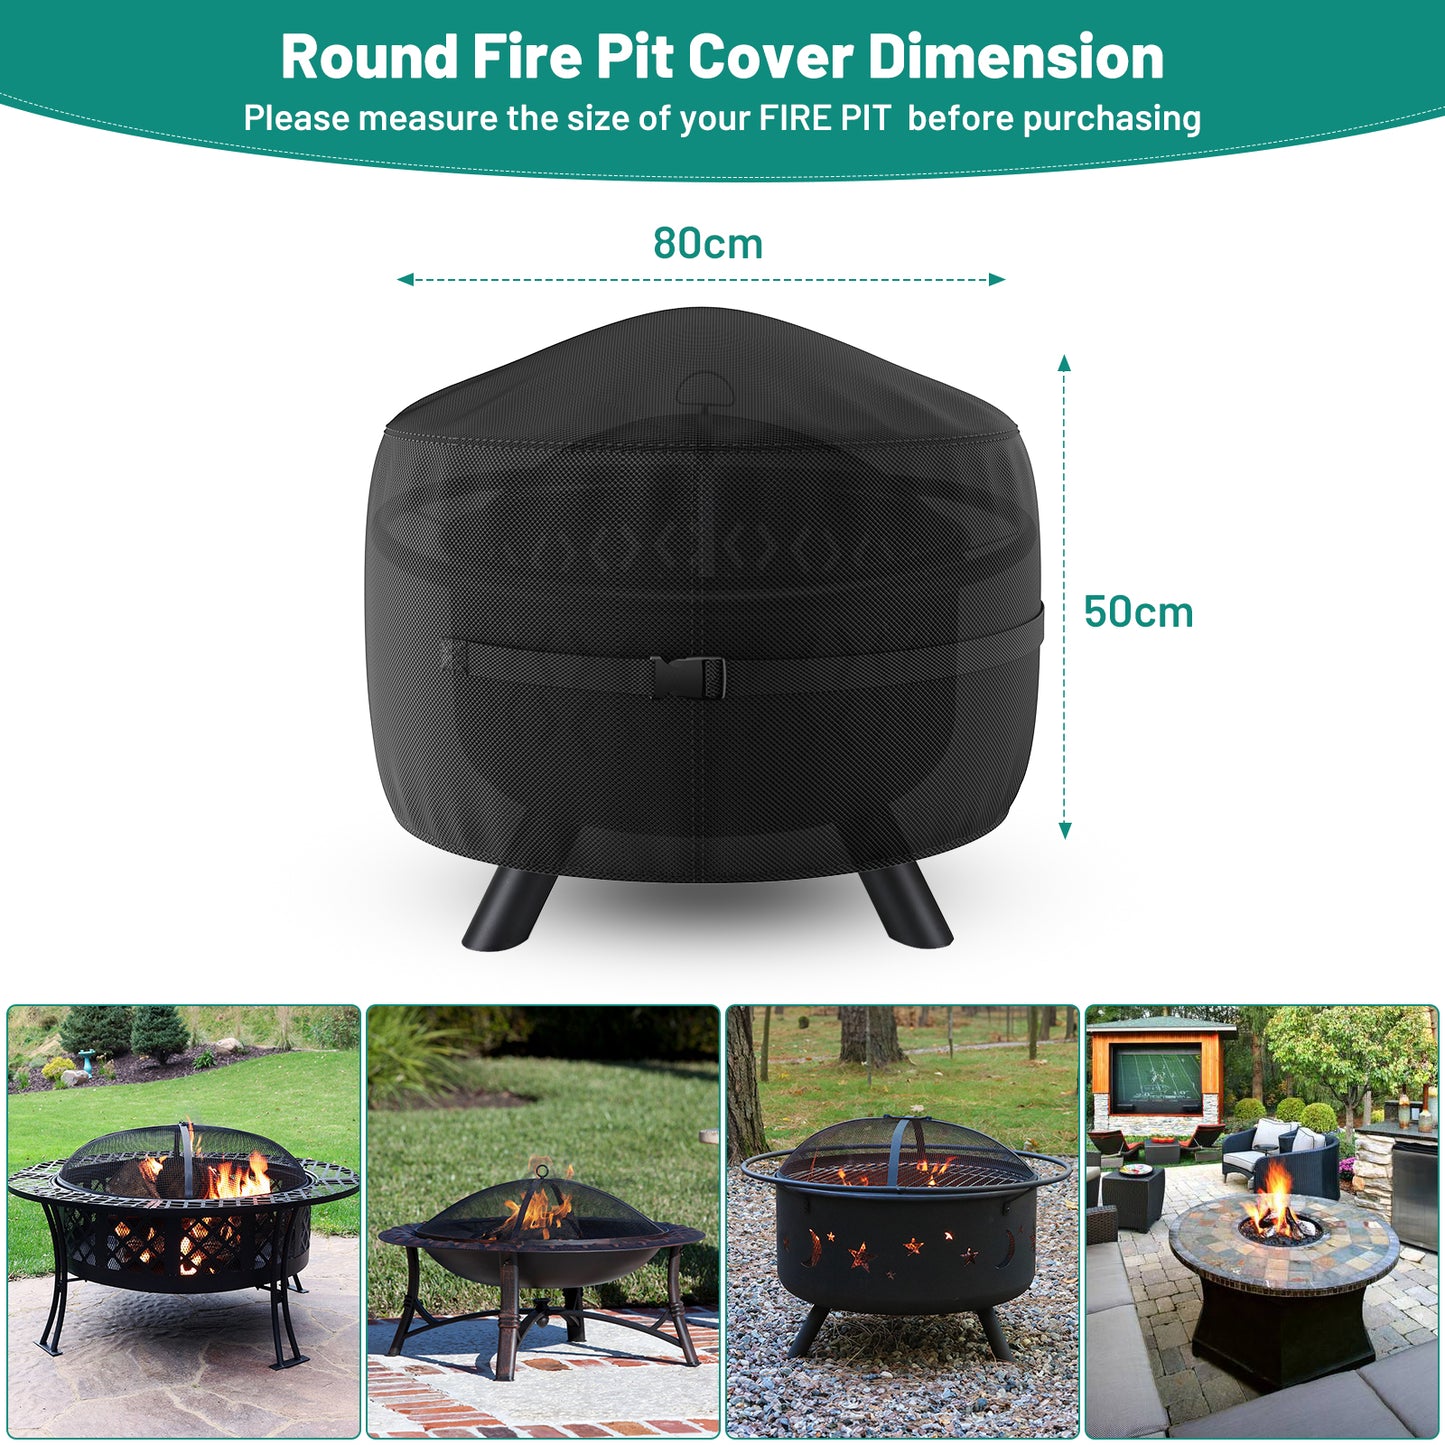 BROSYDA Fire Bowl Cover Waterproof （80 x 50 cm）